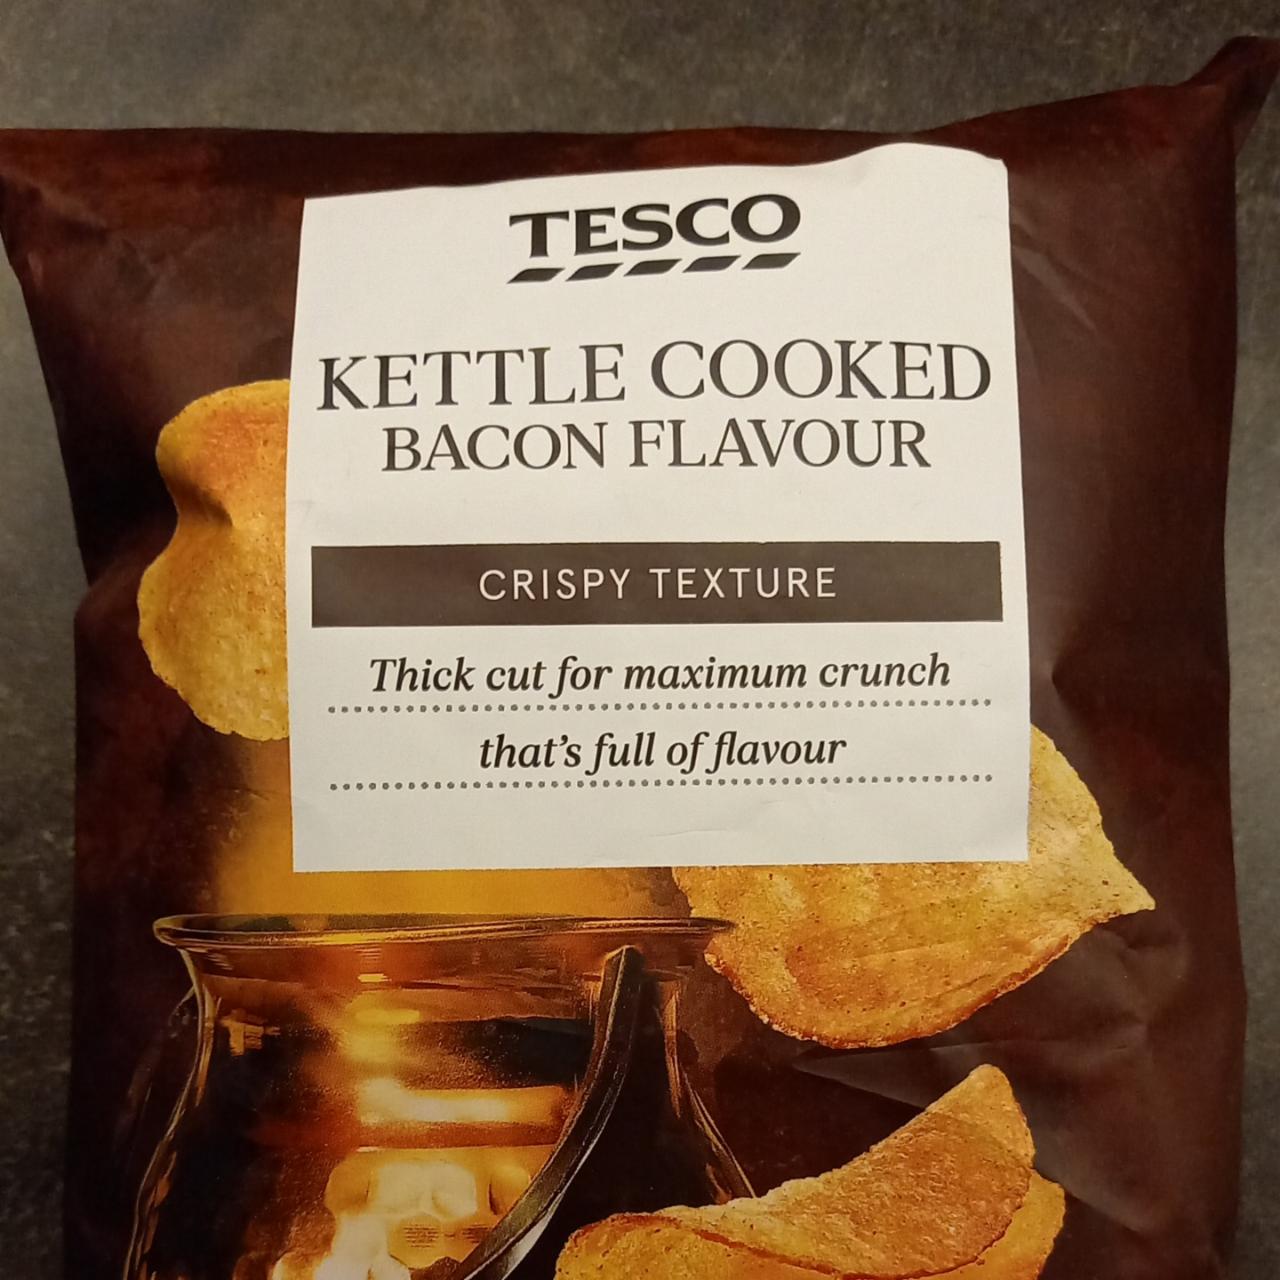 Fotografie - kettle cooked bacon flavour Tesco